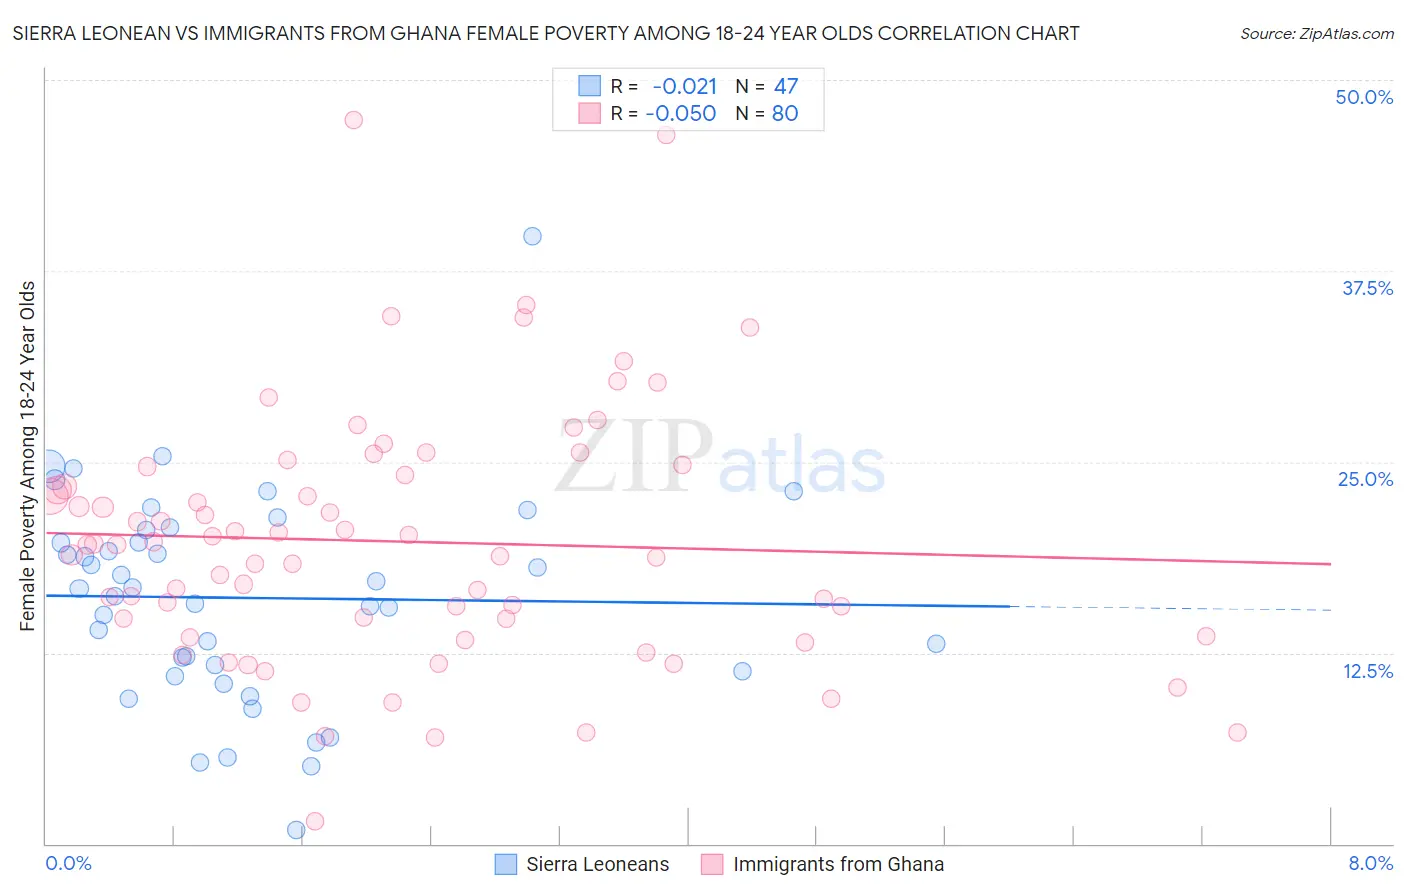 Sierra Leonean vs Immigrants from Ghana Female Poverty Among 18-24 Year Olds